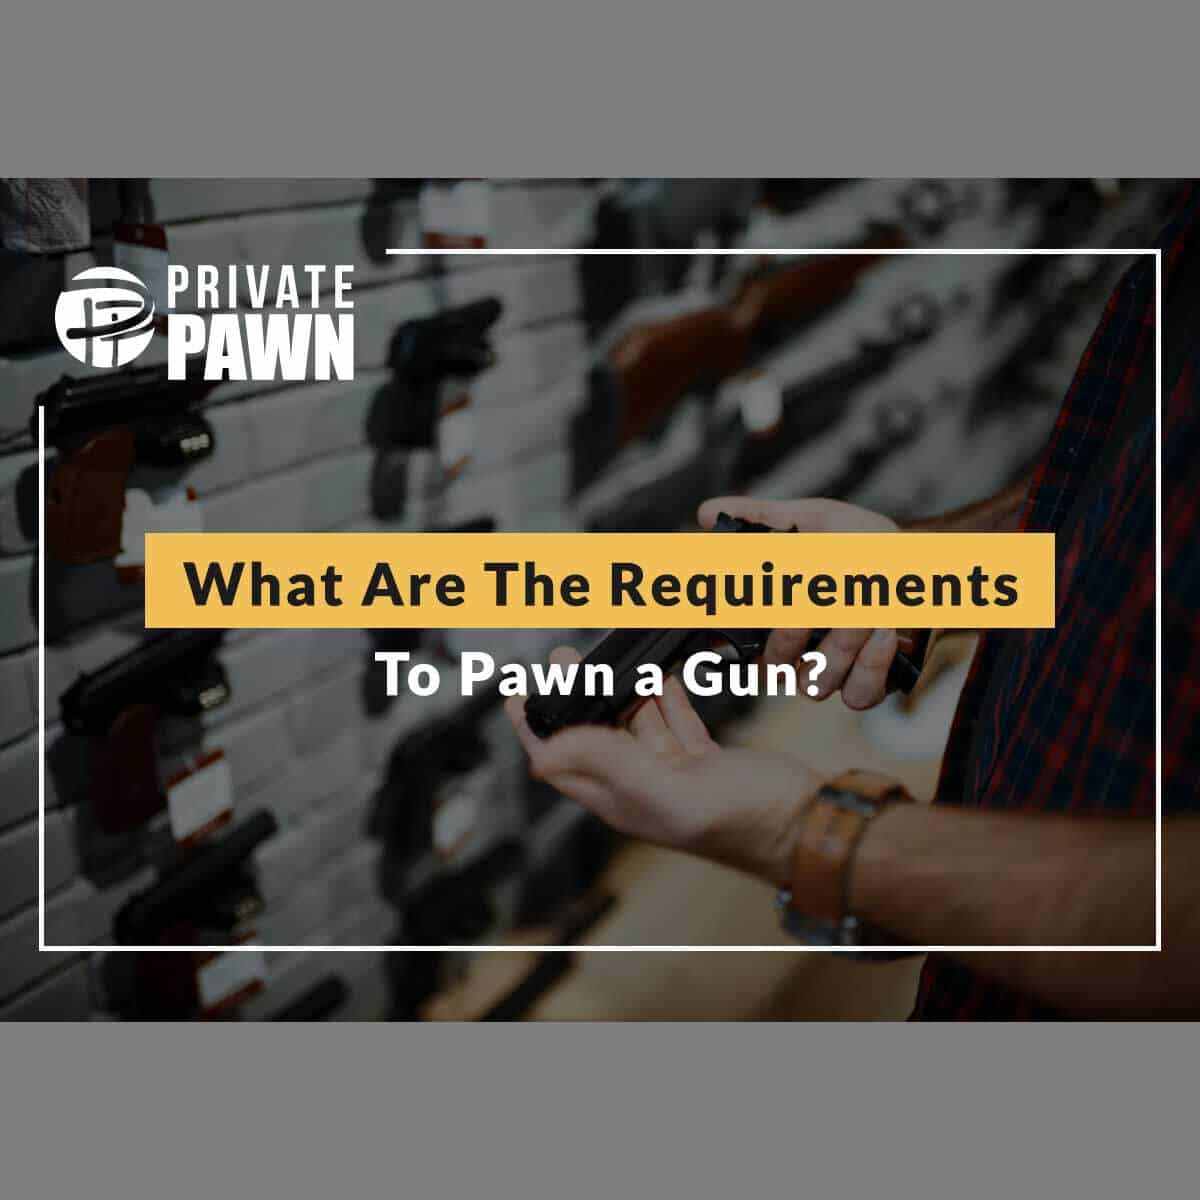 What Are The Requirements To Pawn a Gun?